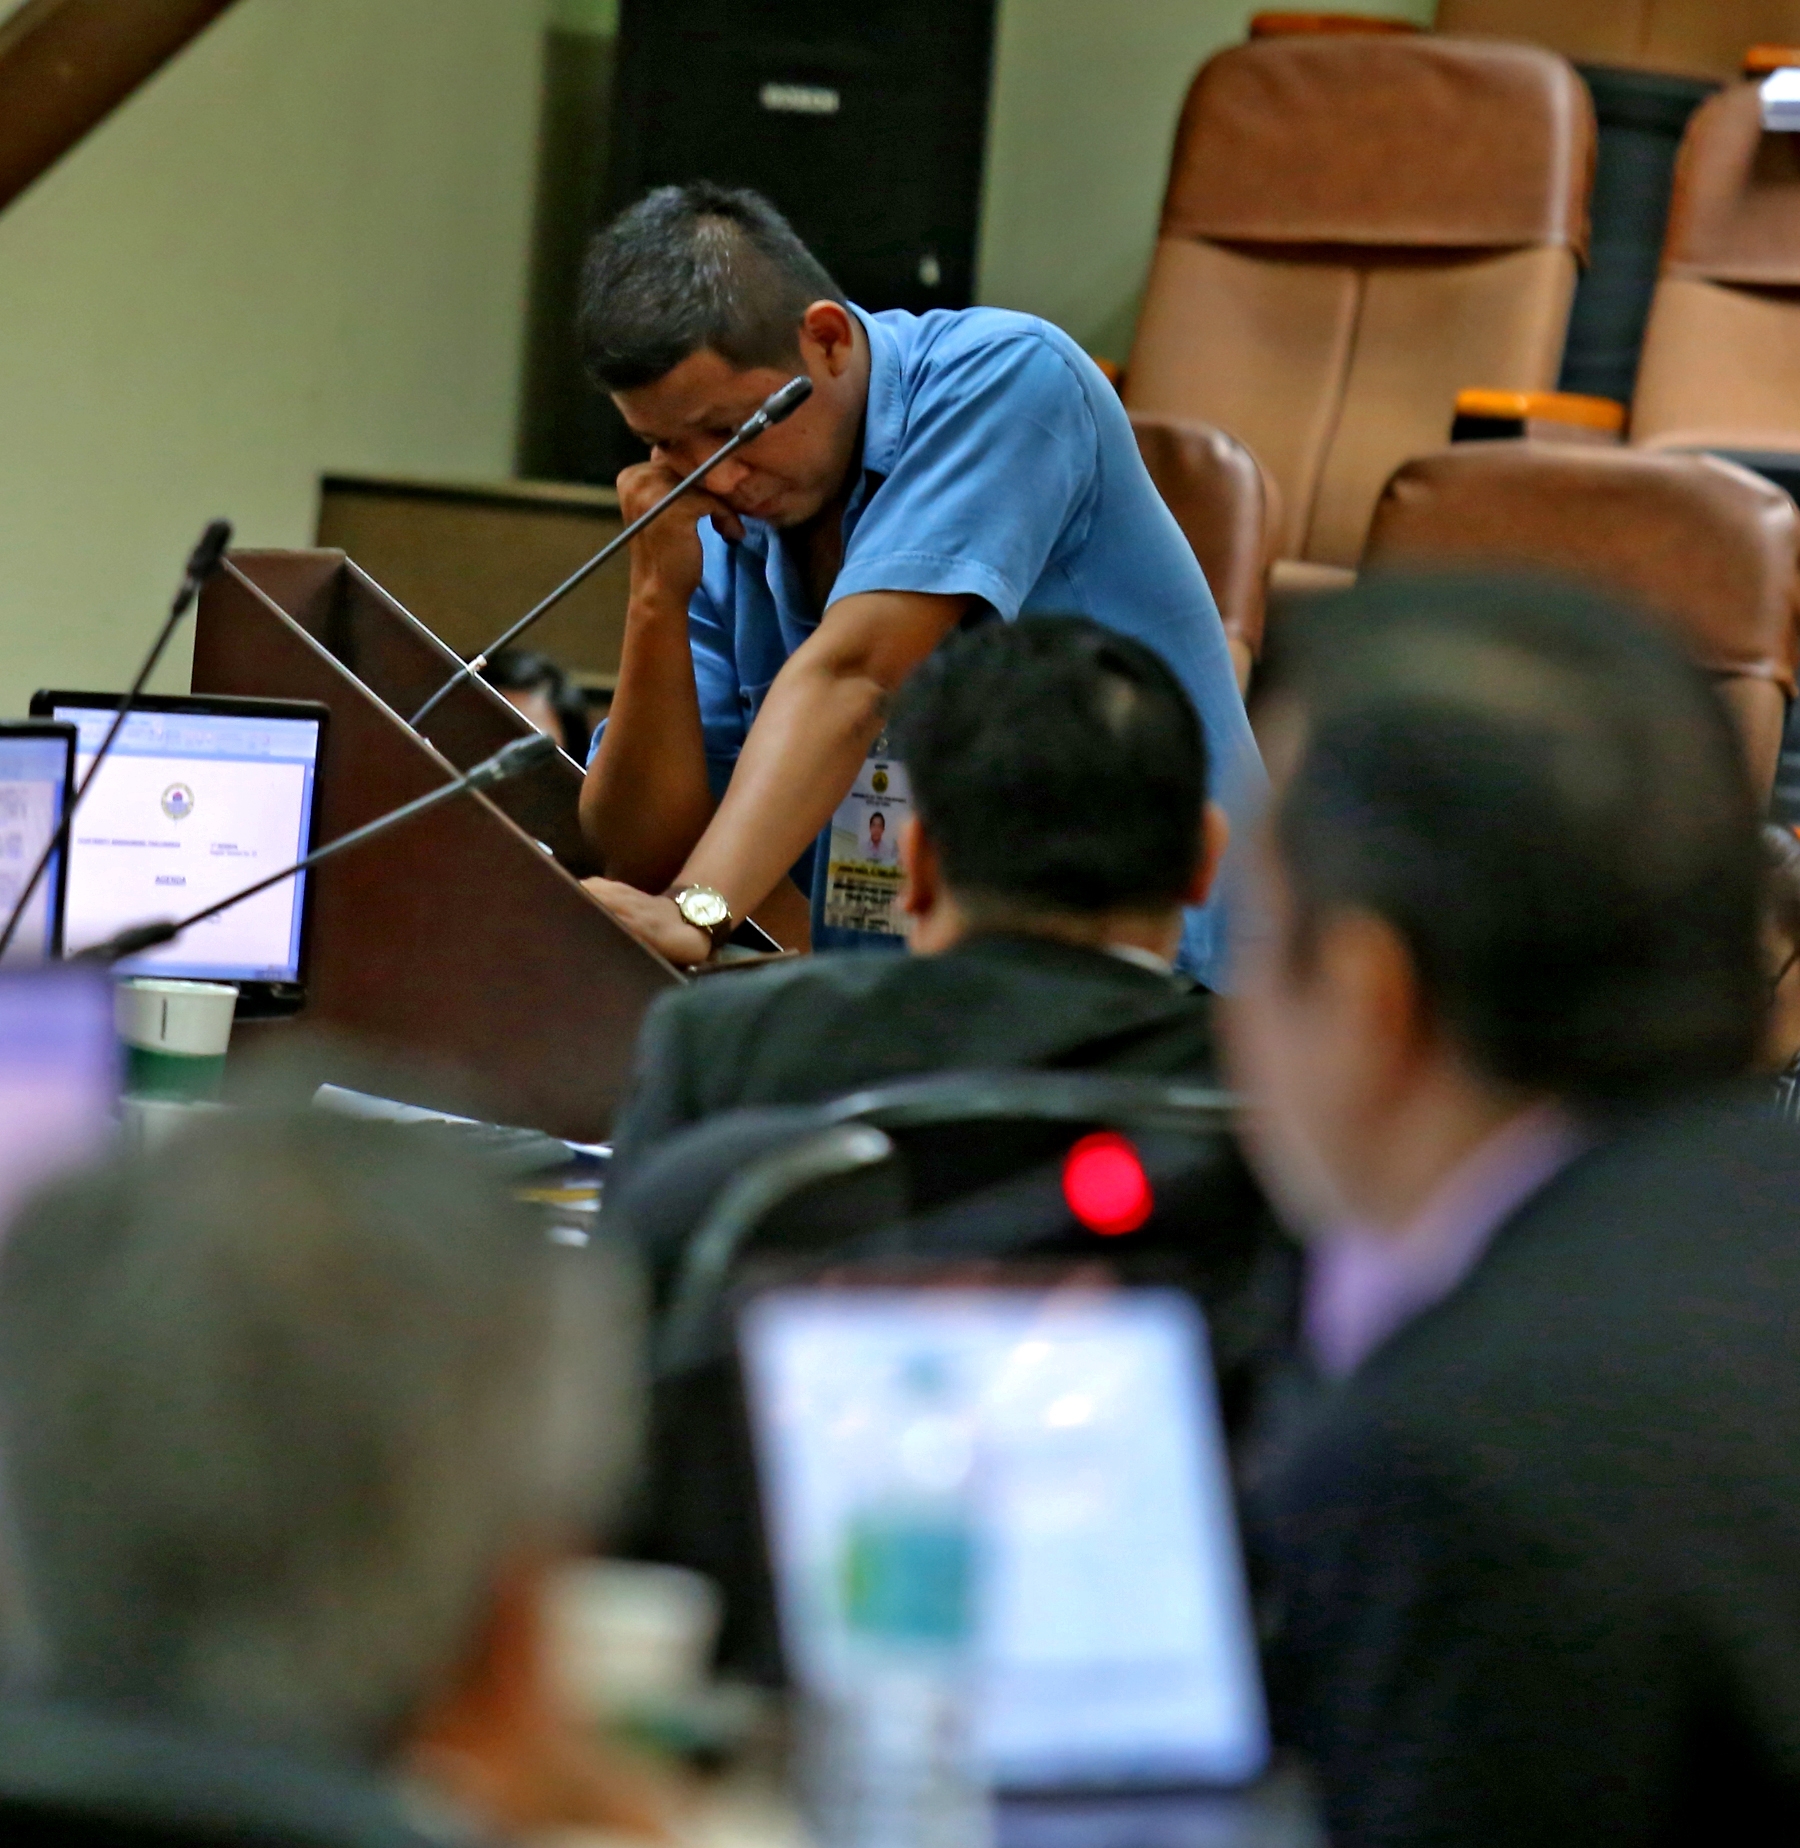 DPS NEEDS ANOTHER P40MILLION/APRIL 18, 2017: John Paul Gelasgues, Departmen of Public service (DPS) assistant head is in pensive mood as he listens to questions from the city council regarding the departments requests for another P40 Million for the garbage disposal during regular session.(CDN PHOTO/JUNJIE MENDOZA)